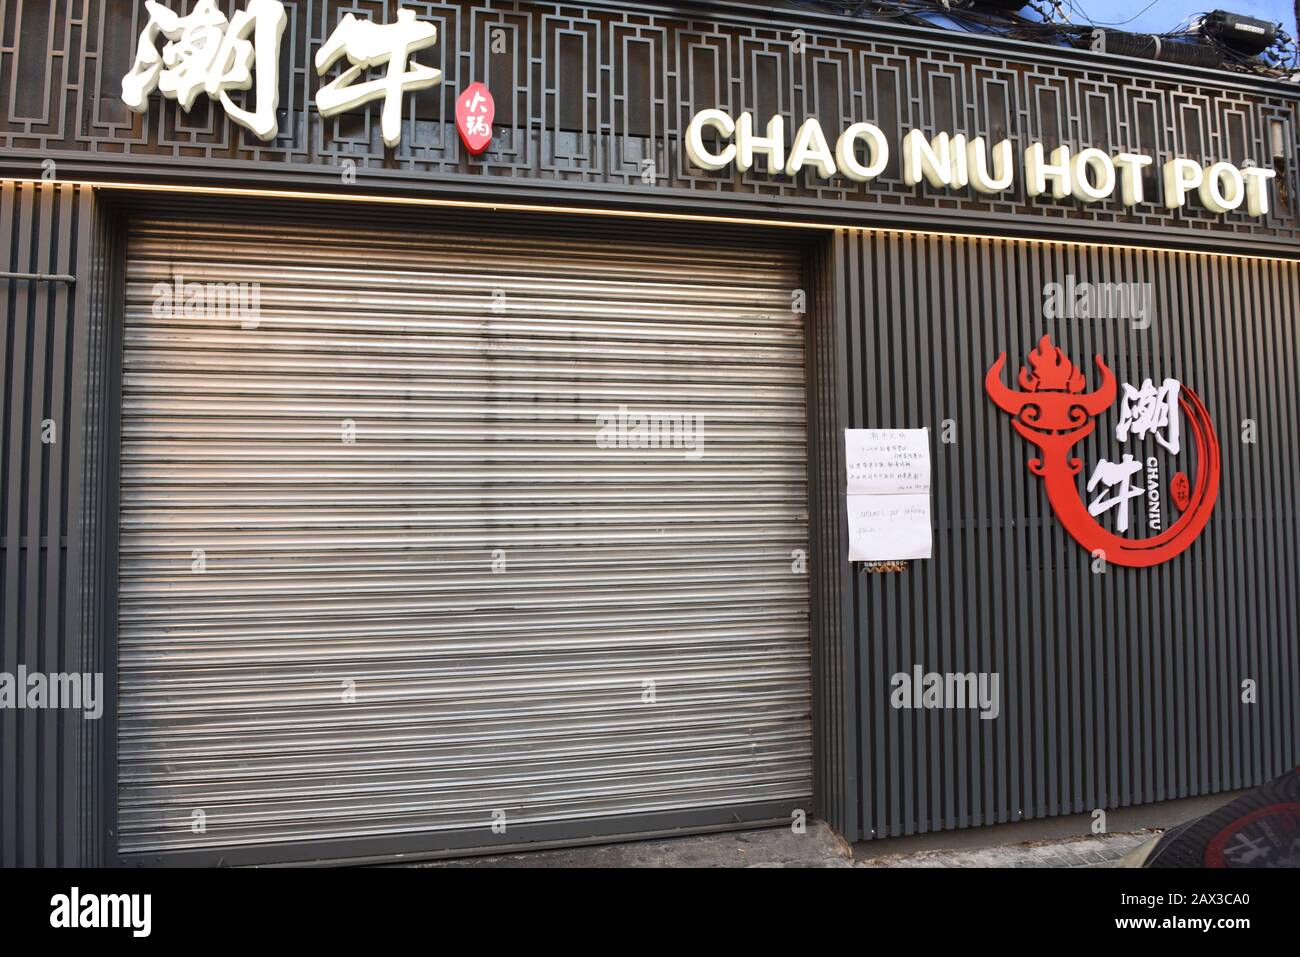 February 10, 2020, Madrid, Spain: A Chinese shop is closed in Usera district..After the outbreak of Coronavirus in China, Chinese residents at Usera district in Madrid have closed hundreds of shops, hairdressers, restaurants and more for fear that they and clients will not get infected with the virus. The city of Madrid has 38,547 Chinese residents, according to official statistics. A quarter of the community has settled in this district. (Credit Image: © Jorge Sanz/SOPA Images via ZUMA Wire) Stock Photo